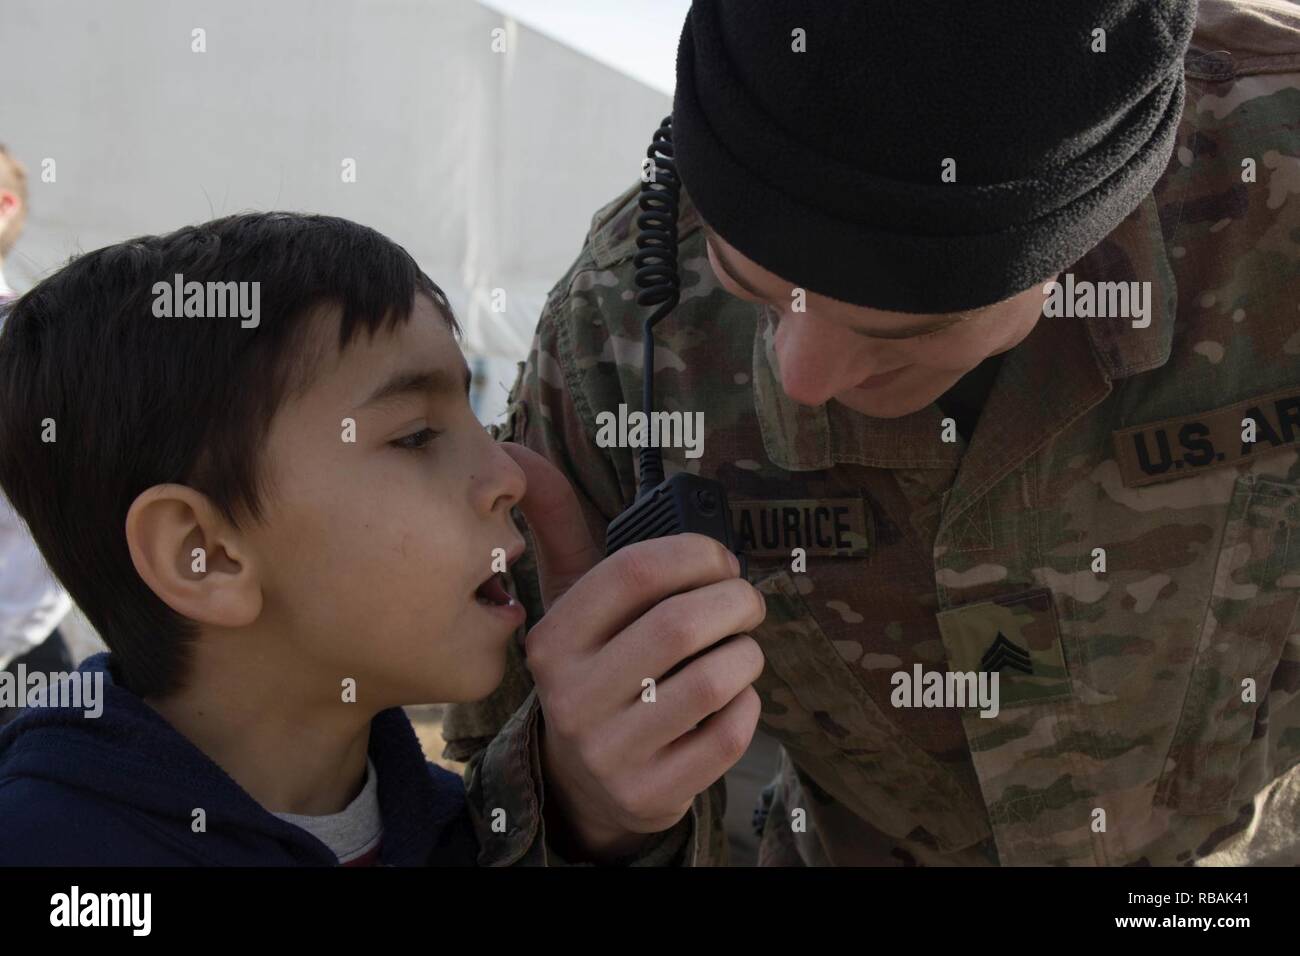 U.S. Army Sgt. Adam Fitzmaurice, assigned to the 396th Military Police Detachment, lets a child from a local orphanage speak on his radio during a holiday celebration at Mihail Kogalniceanu Airbase, Romania, Dec. 22, 2018. The base hosted the event to provide a memorable holiday season for children in the area and solidify the strong relationship the U.S. has with its Romanian ally. Stock Photo